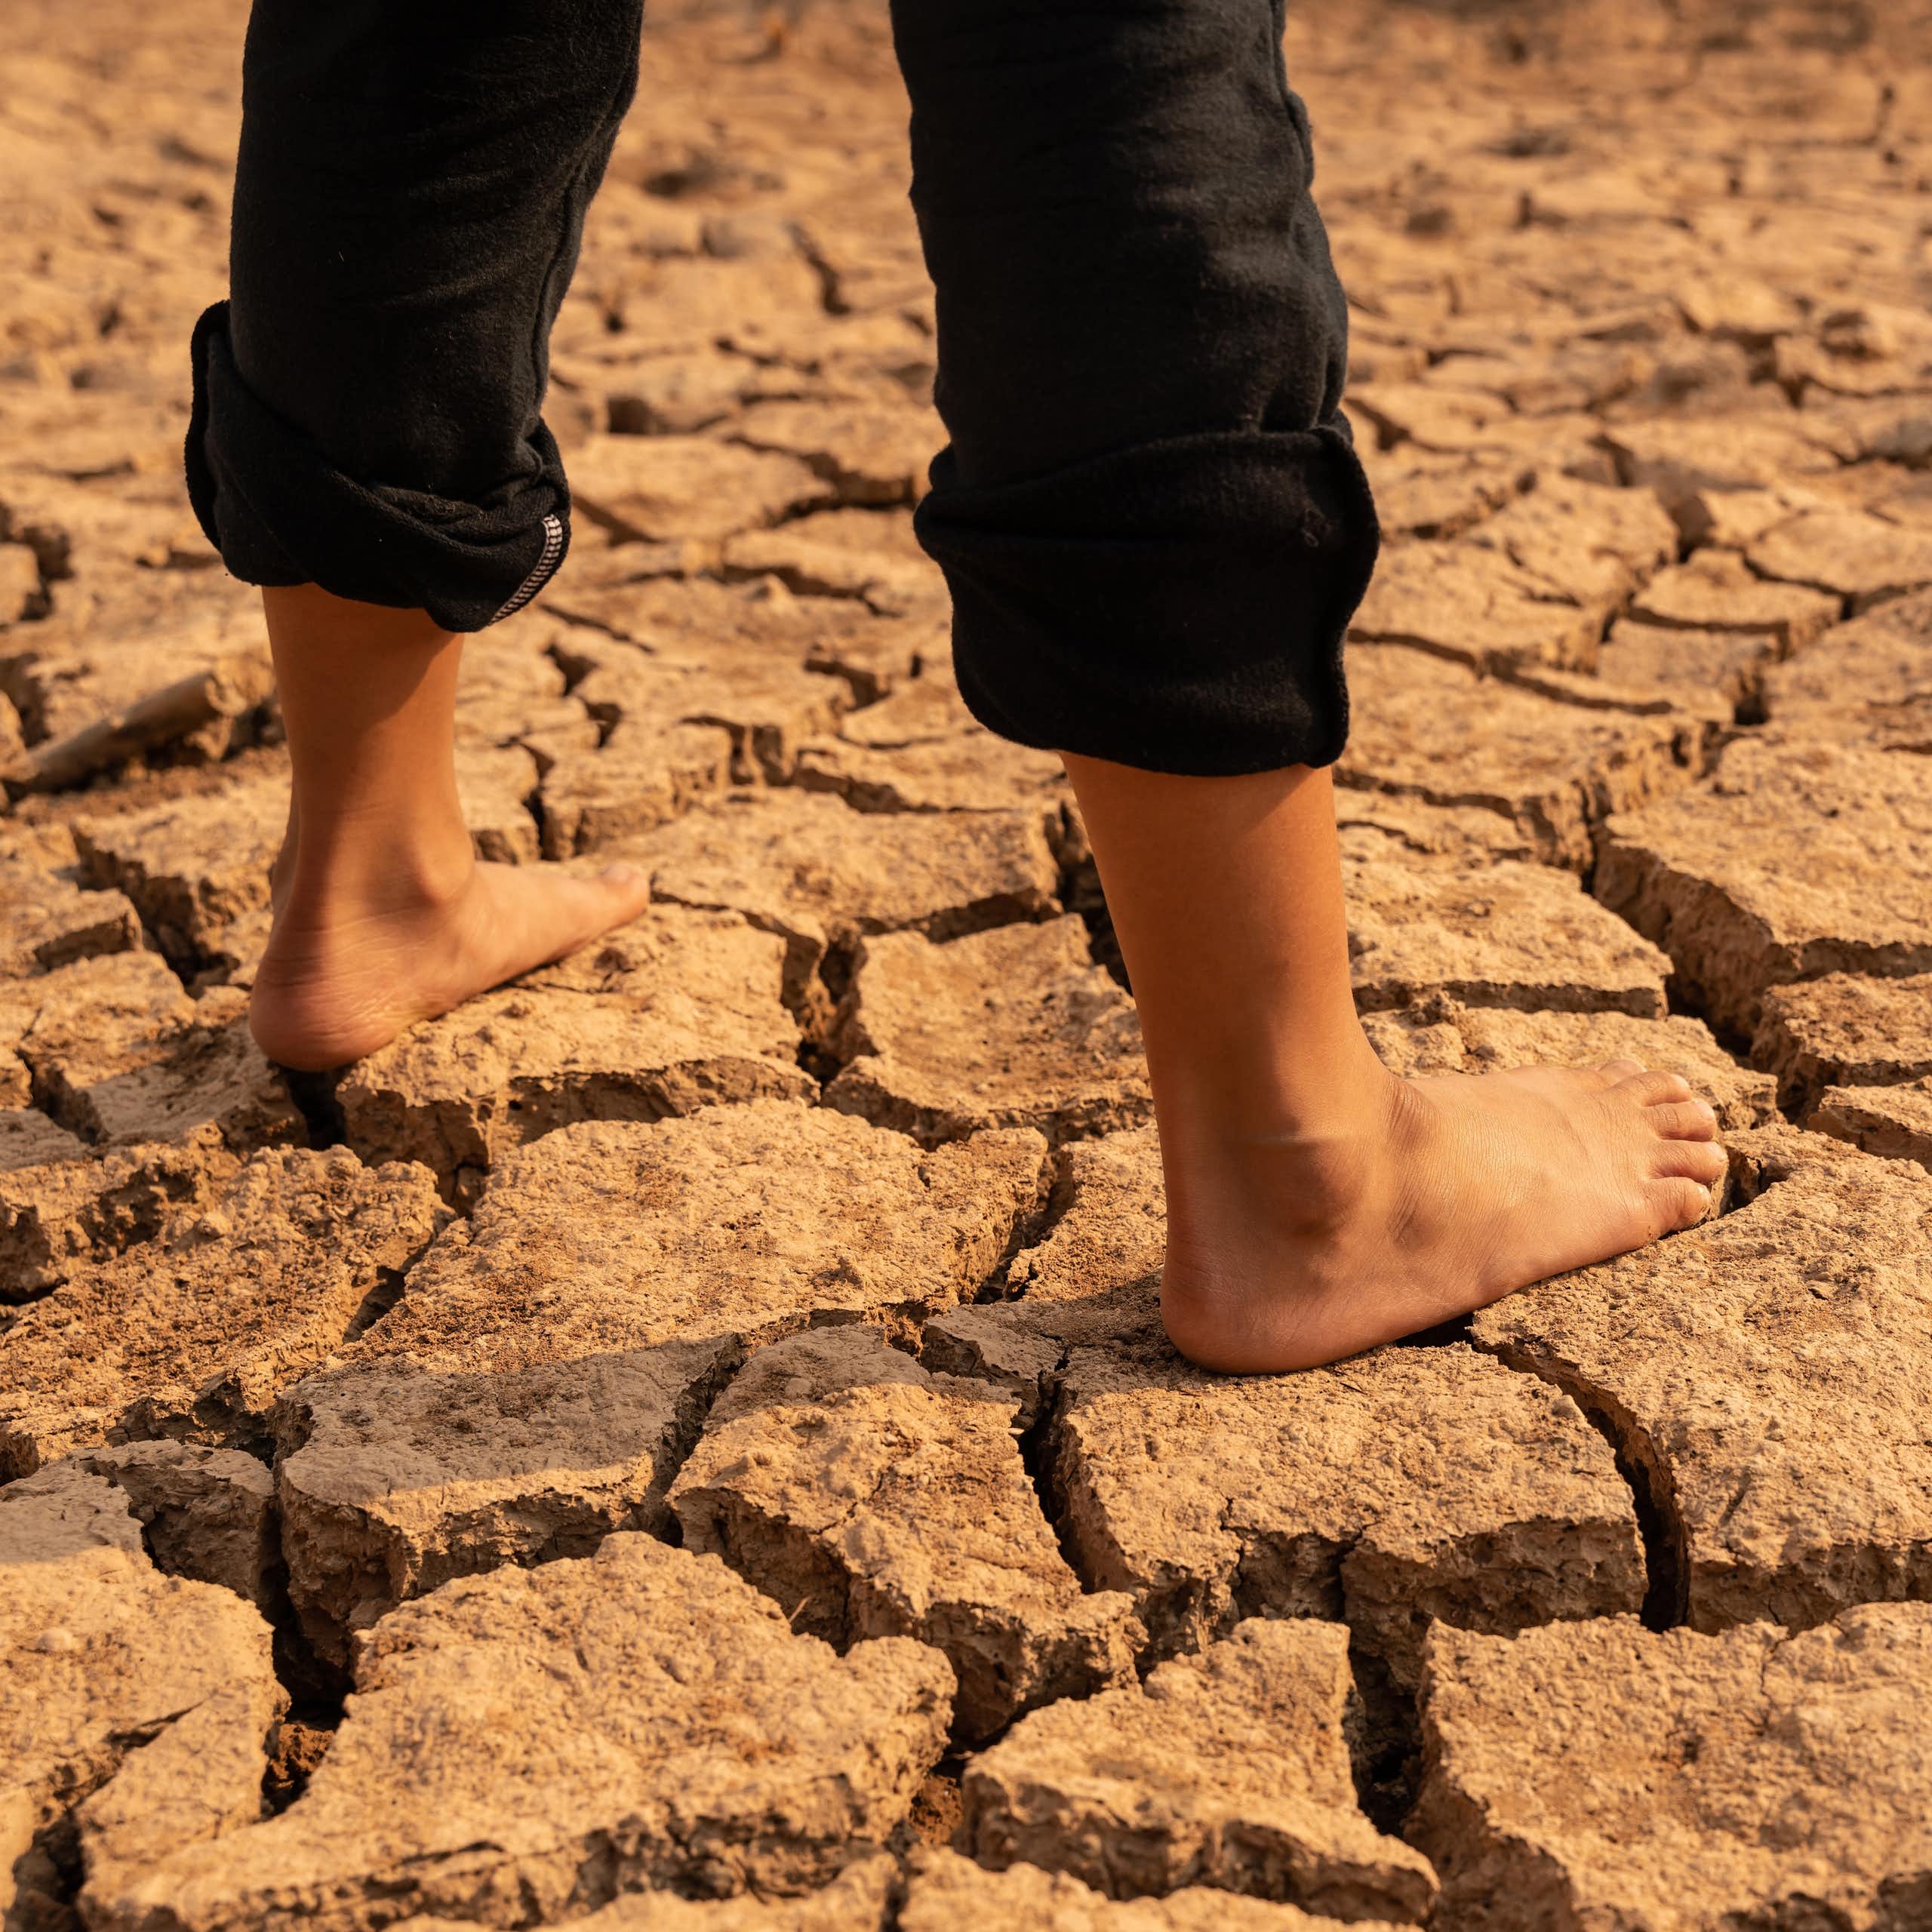 CRacked dry desert ground, young girl's legs with bare feet and black rolled up trousers standing on ground